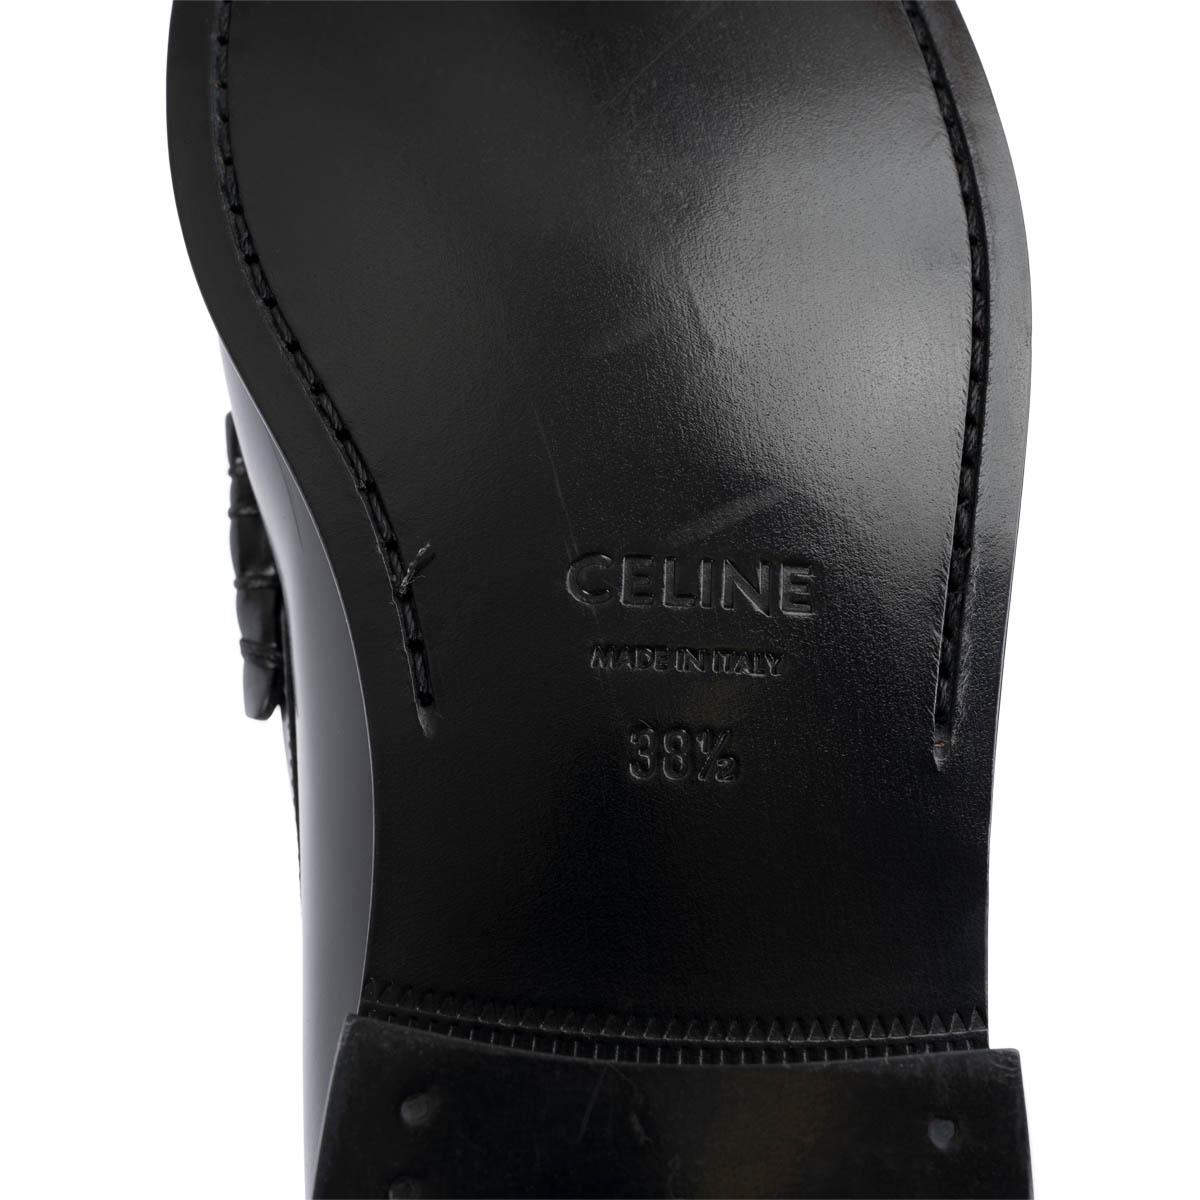 CELINE black leather LUCO TRIOMPHE Loafers Shoes 38.5 2